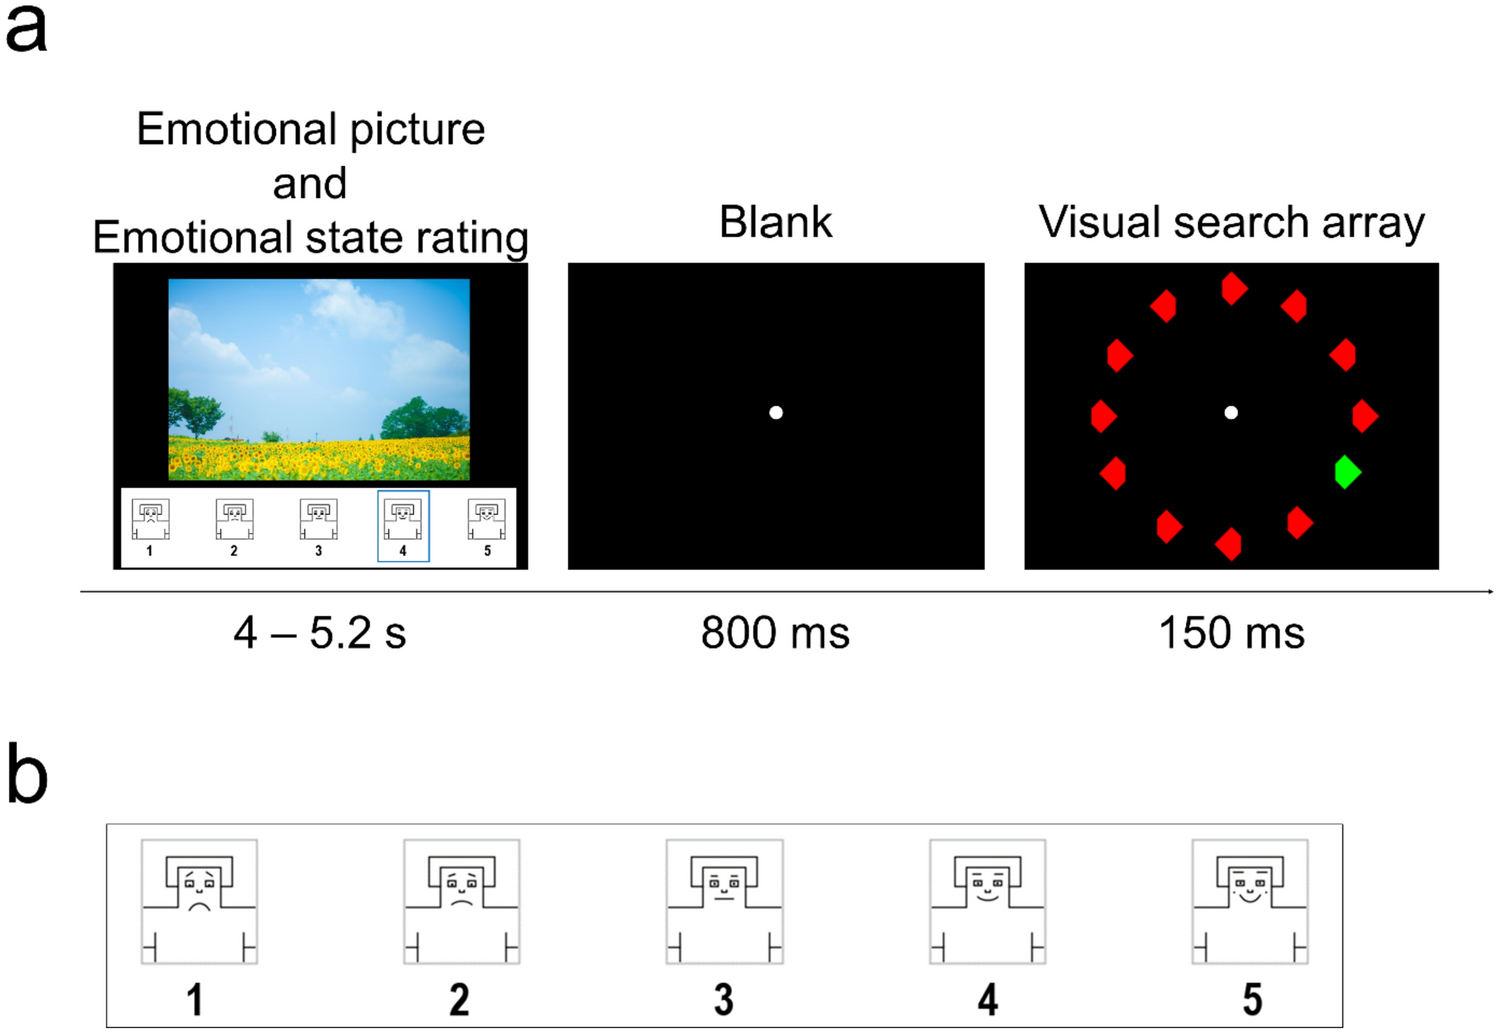 Unpleasant emotion inhibits attentional focus toward a peripheral target in a visual search: an ERP study